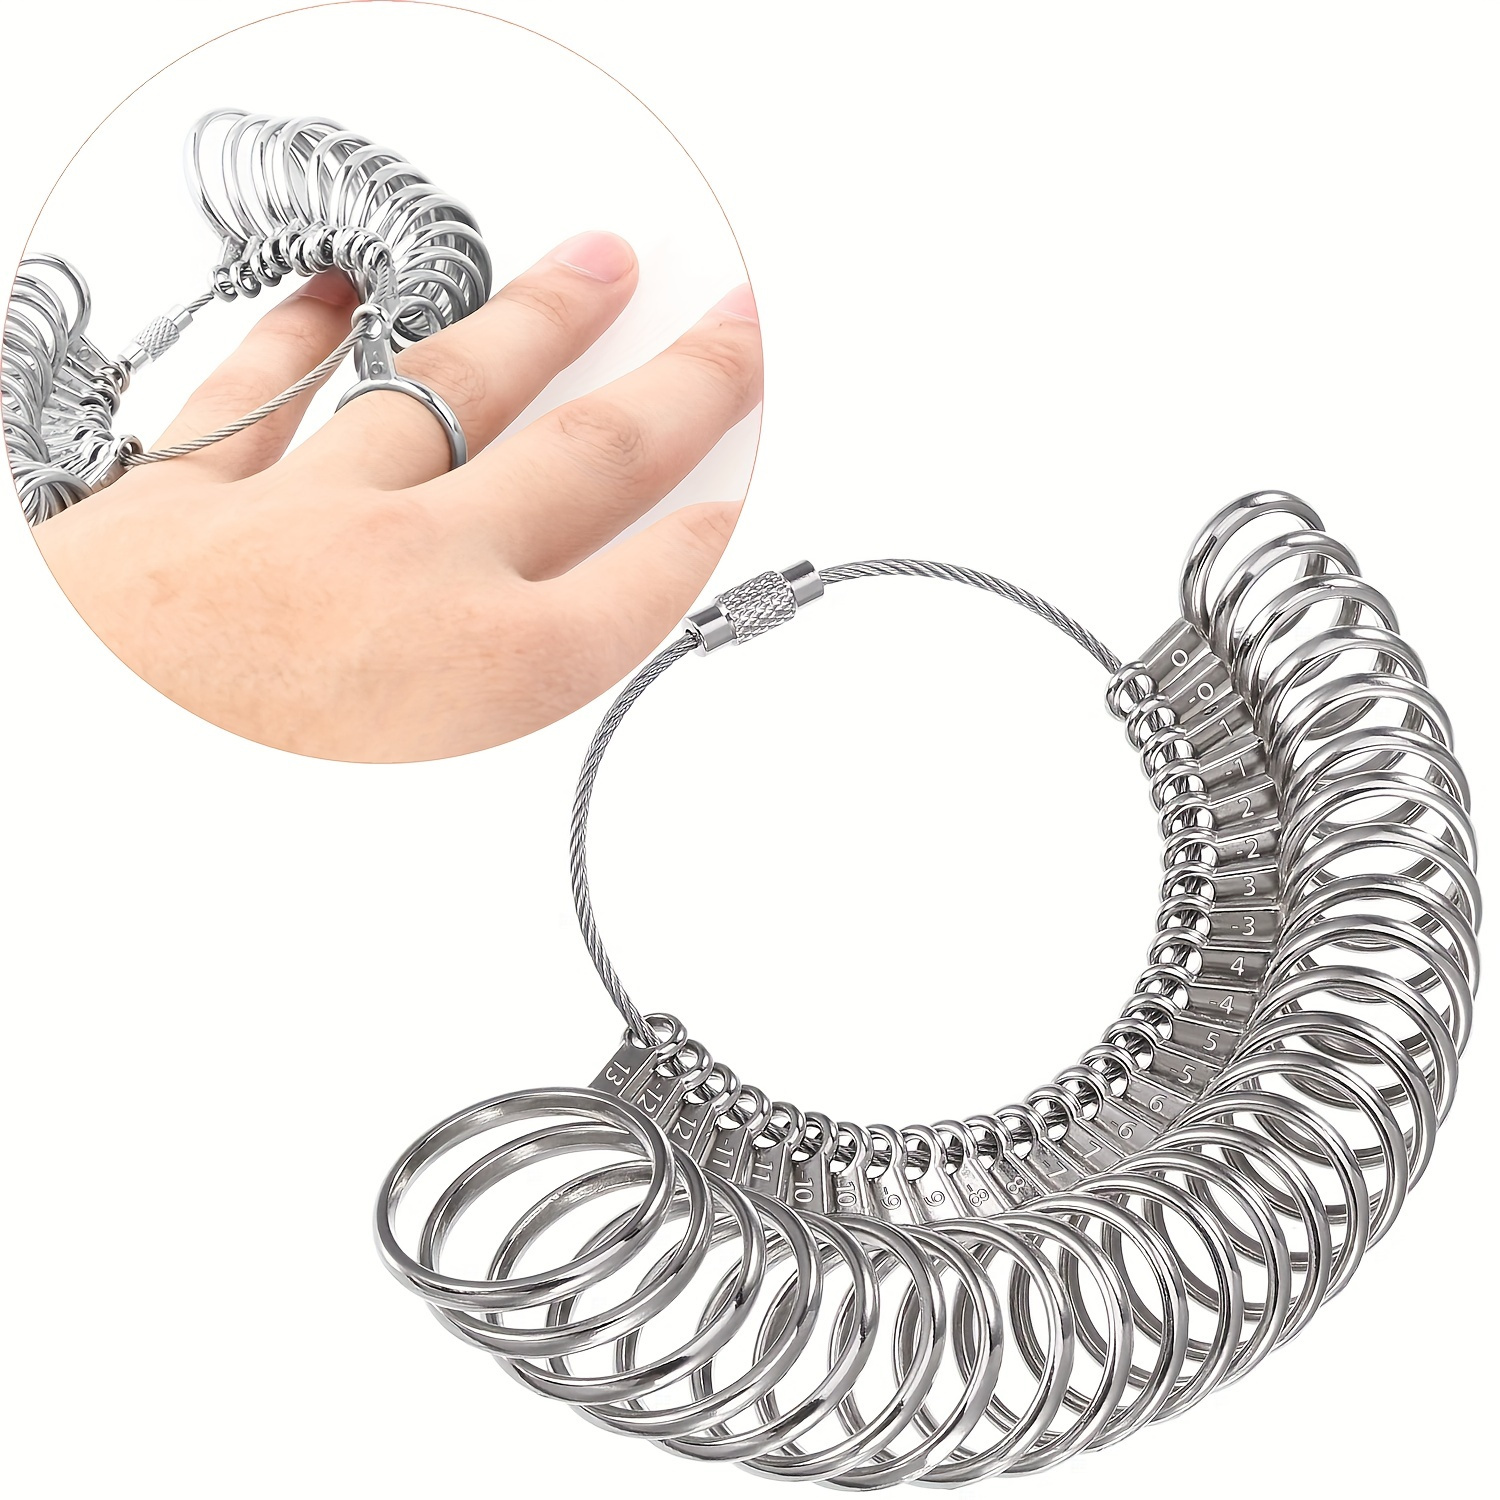 Accurate and Convenient Ring Sizer Set: 27-Piece Ring Measuring